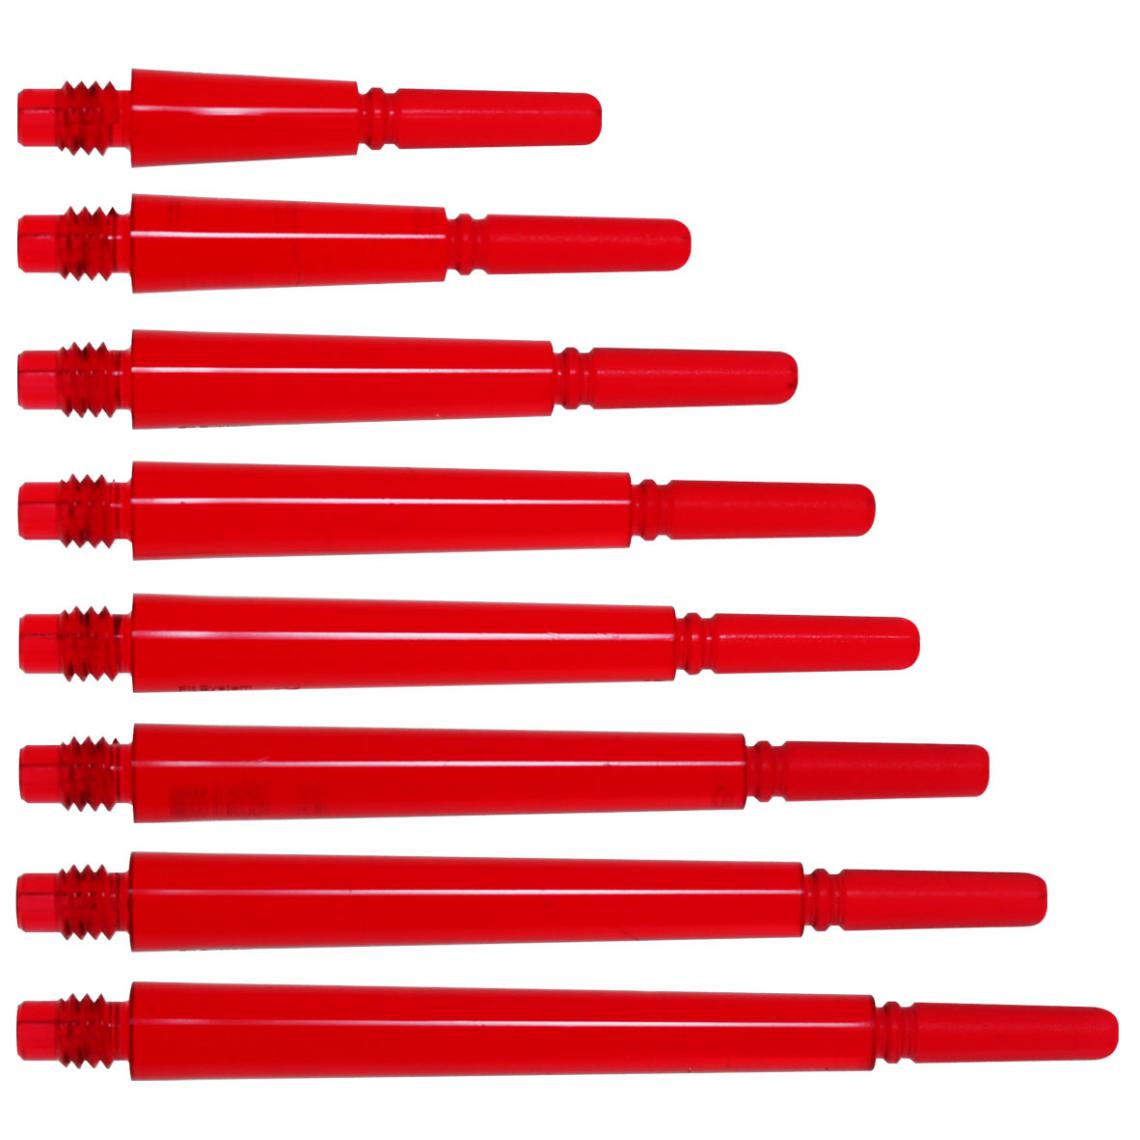 Sulion - Shaft Fit Filght GEAR NORMAL SPINNING - Clear Rouge (Plusieurs tailles) N°1 - 13mm - Accessoires fléchettes